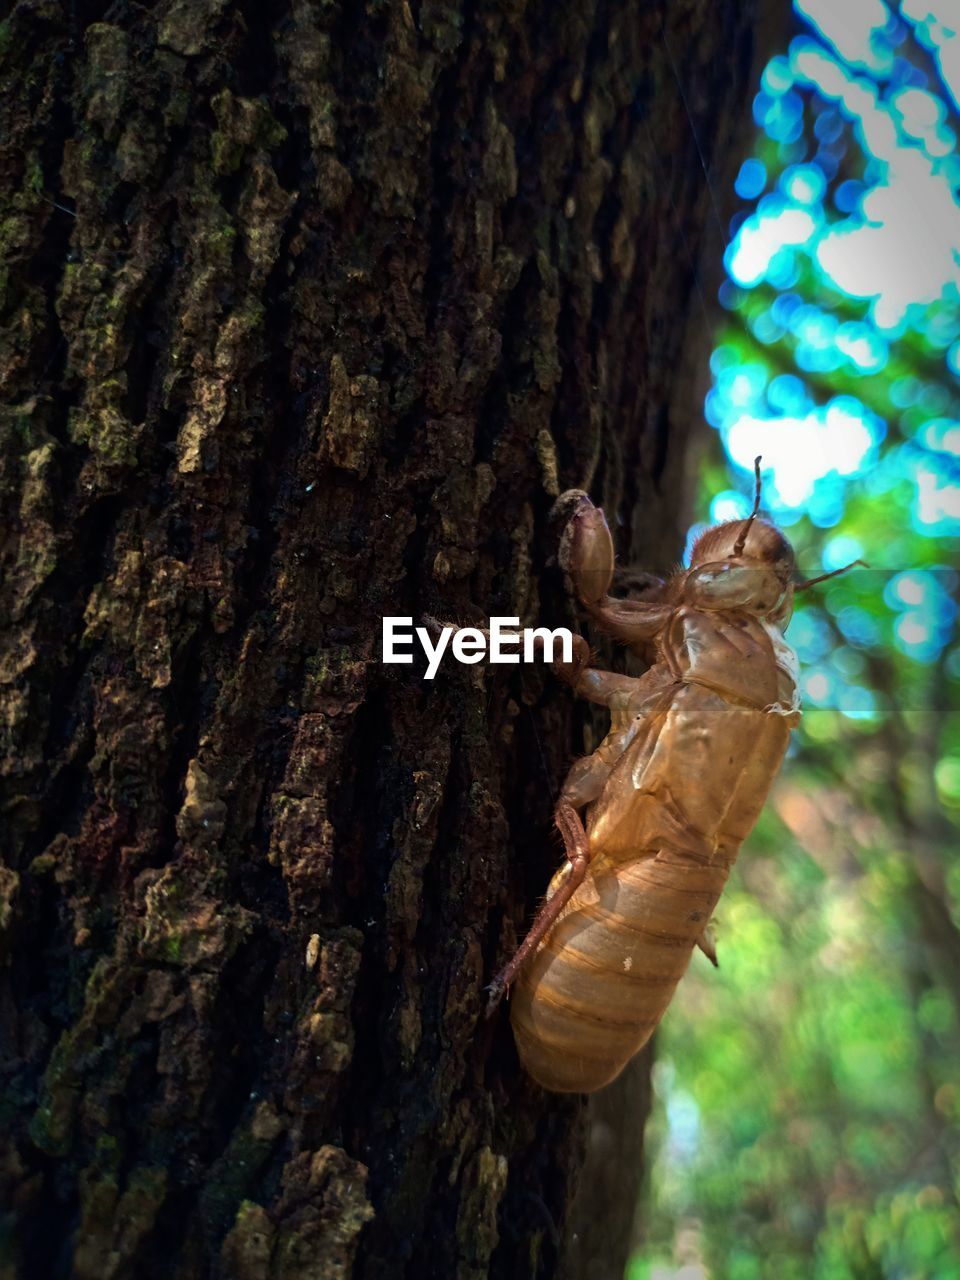 CLOSE-UP OF INSECT ON TREE TRUNK AGAINST BLURRED BACKGROUND